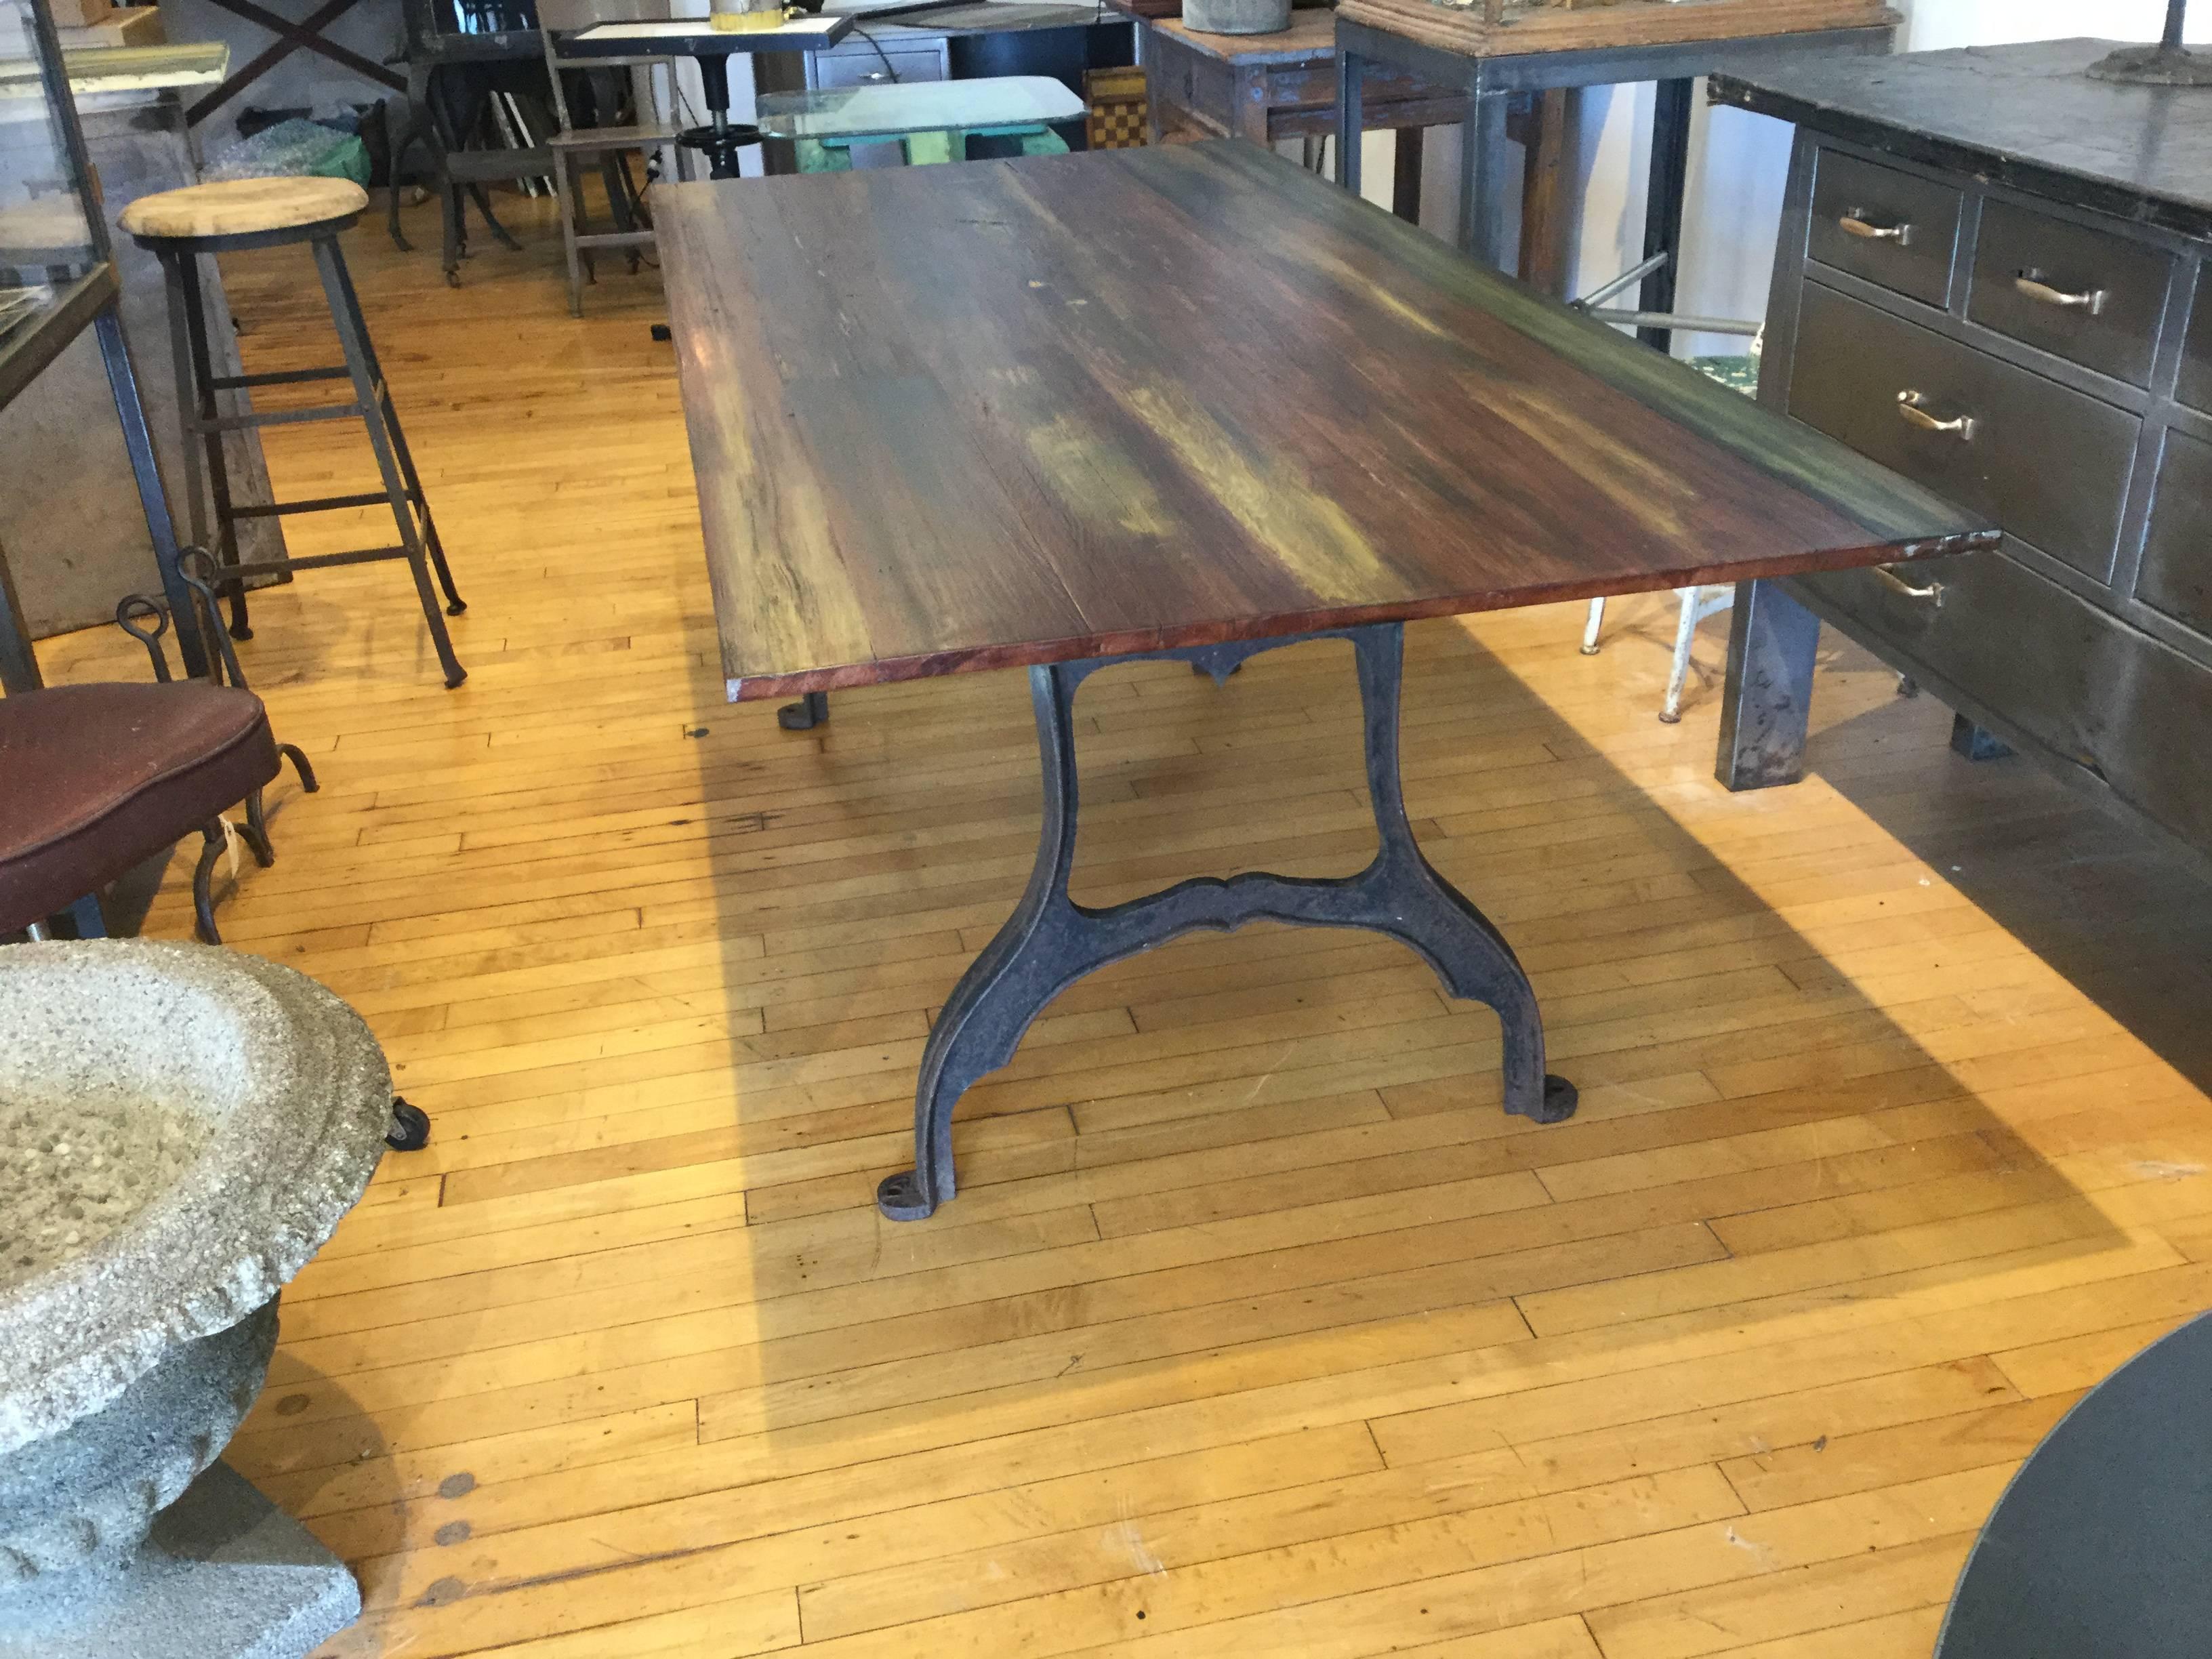 Industrial 19th century cast iron base dining or work table or desk. Redwood top made from 19th century NYC water towers. The redwood had absorbed minerals and chemicals from the water over one hundred years that left gray greens and dark reds . A